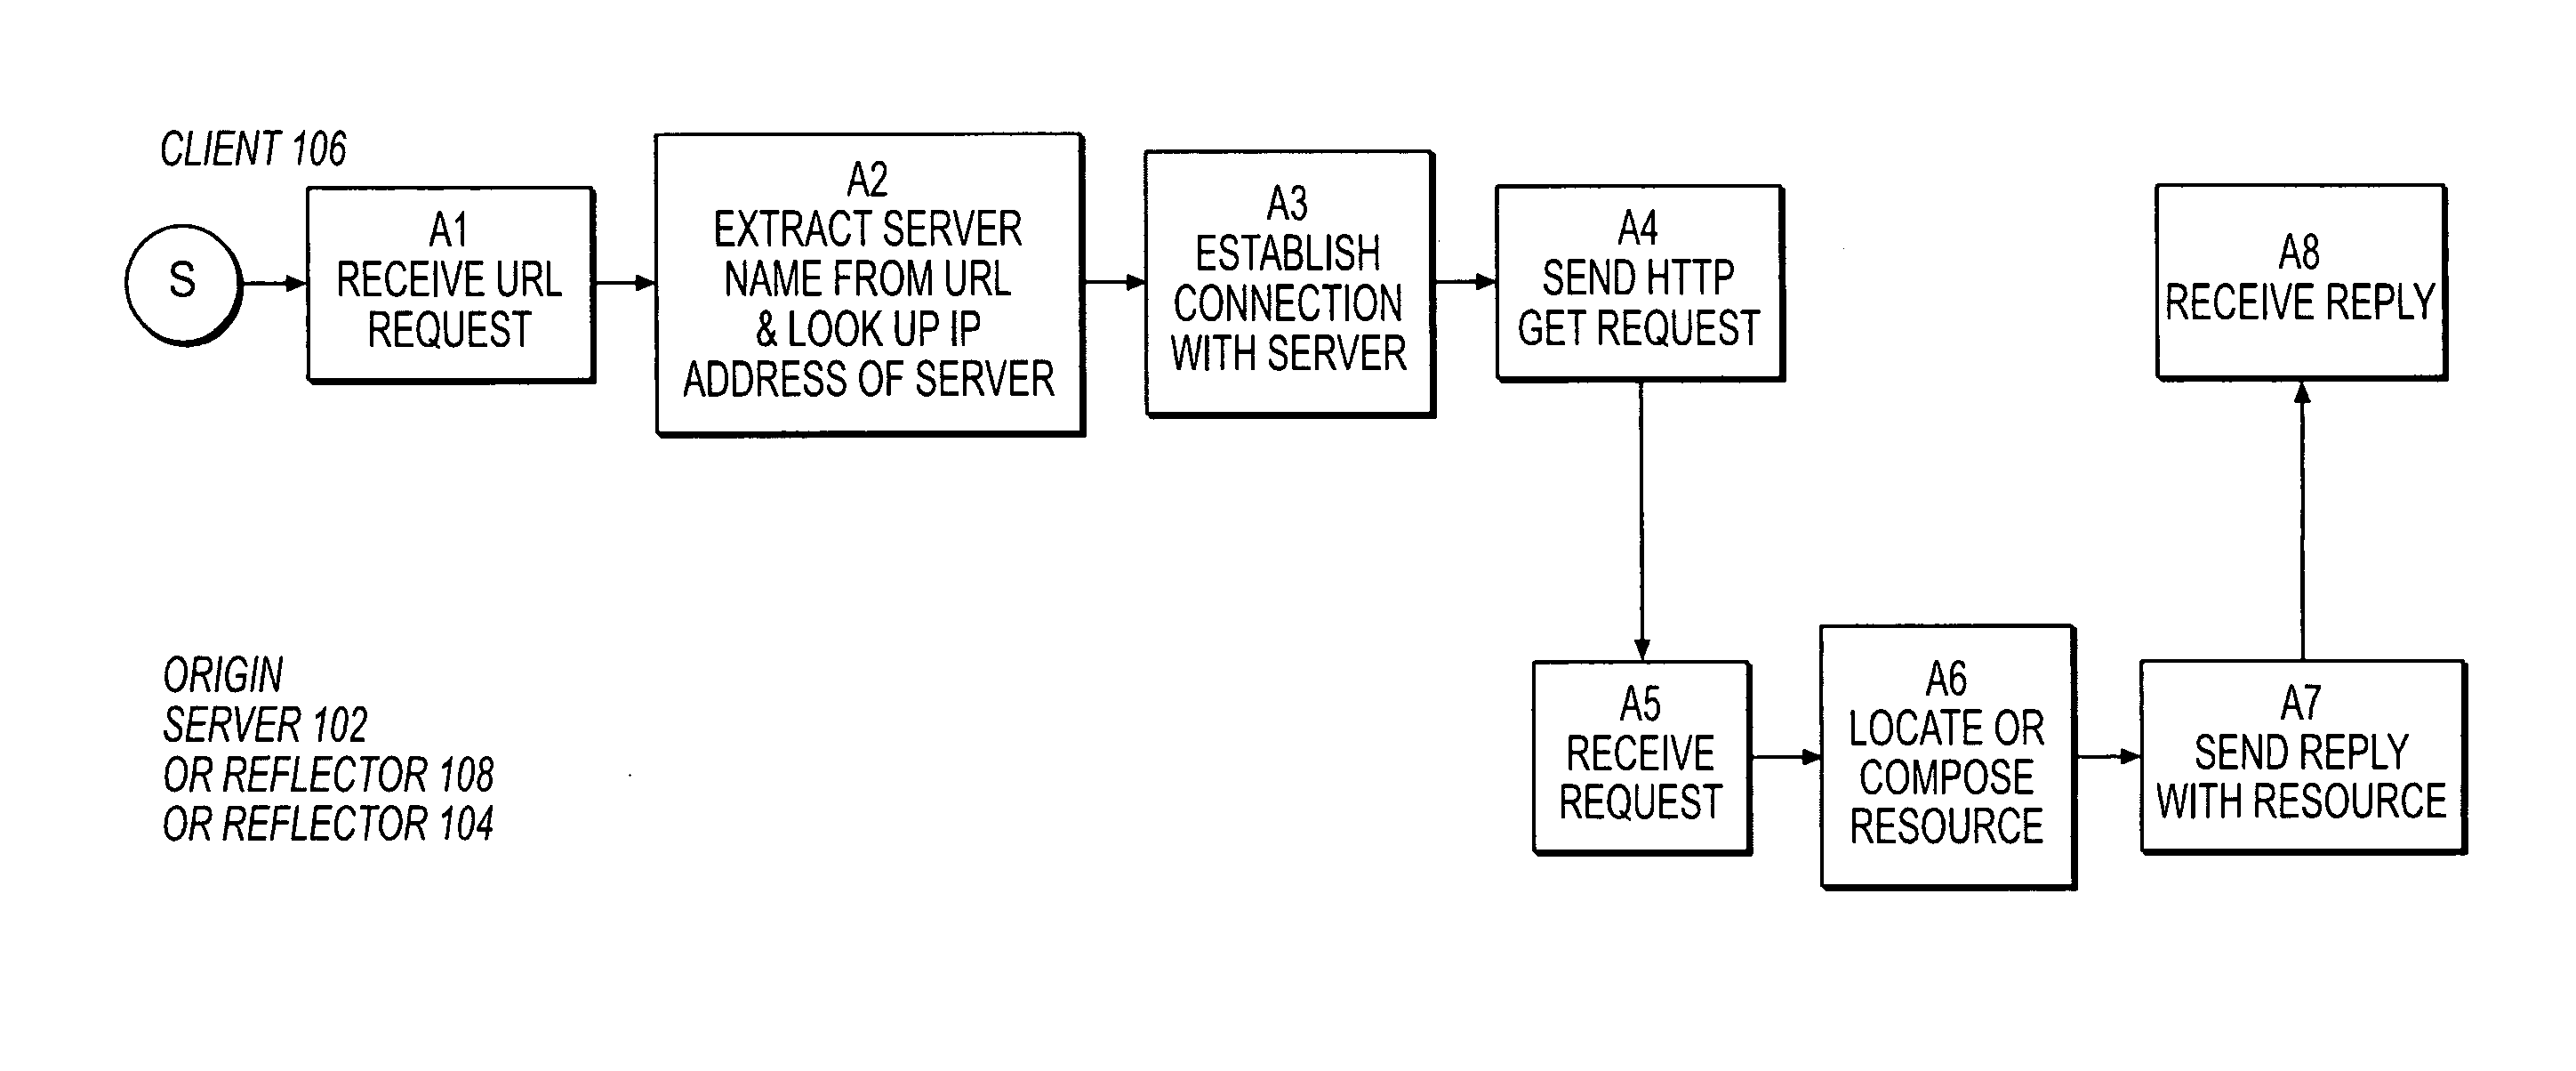 Resource invalidation in a content delivery network